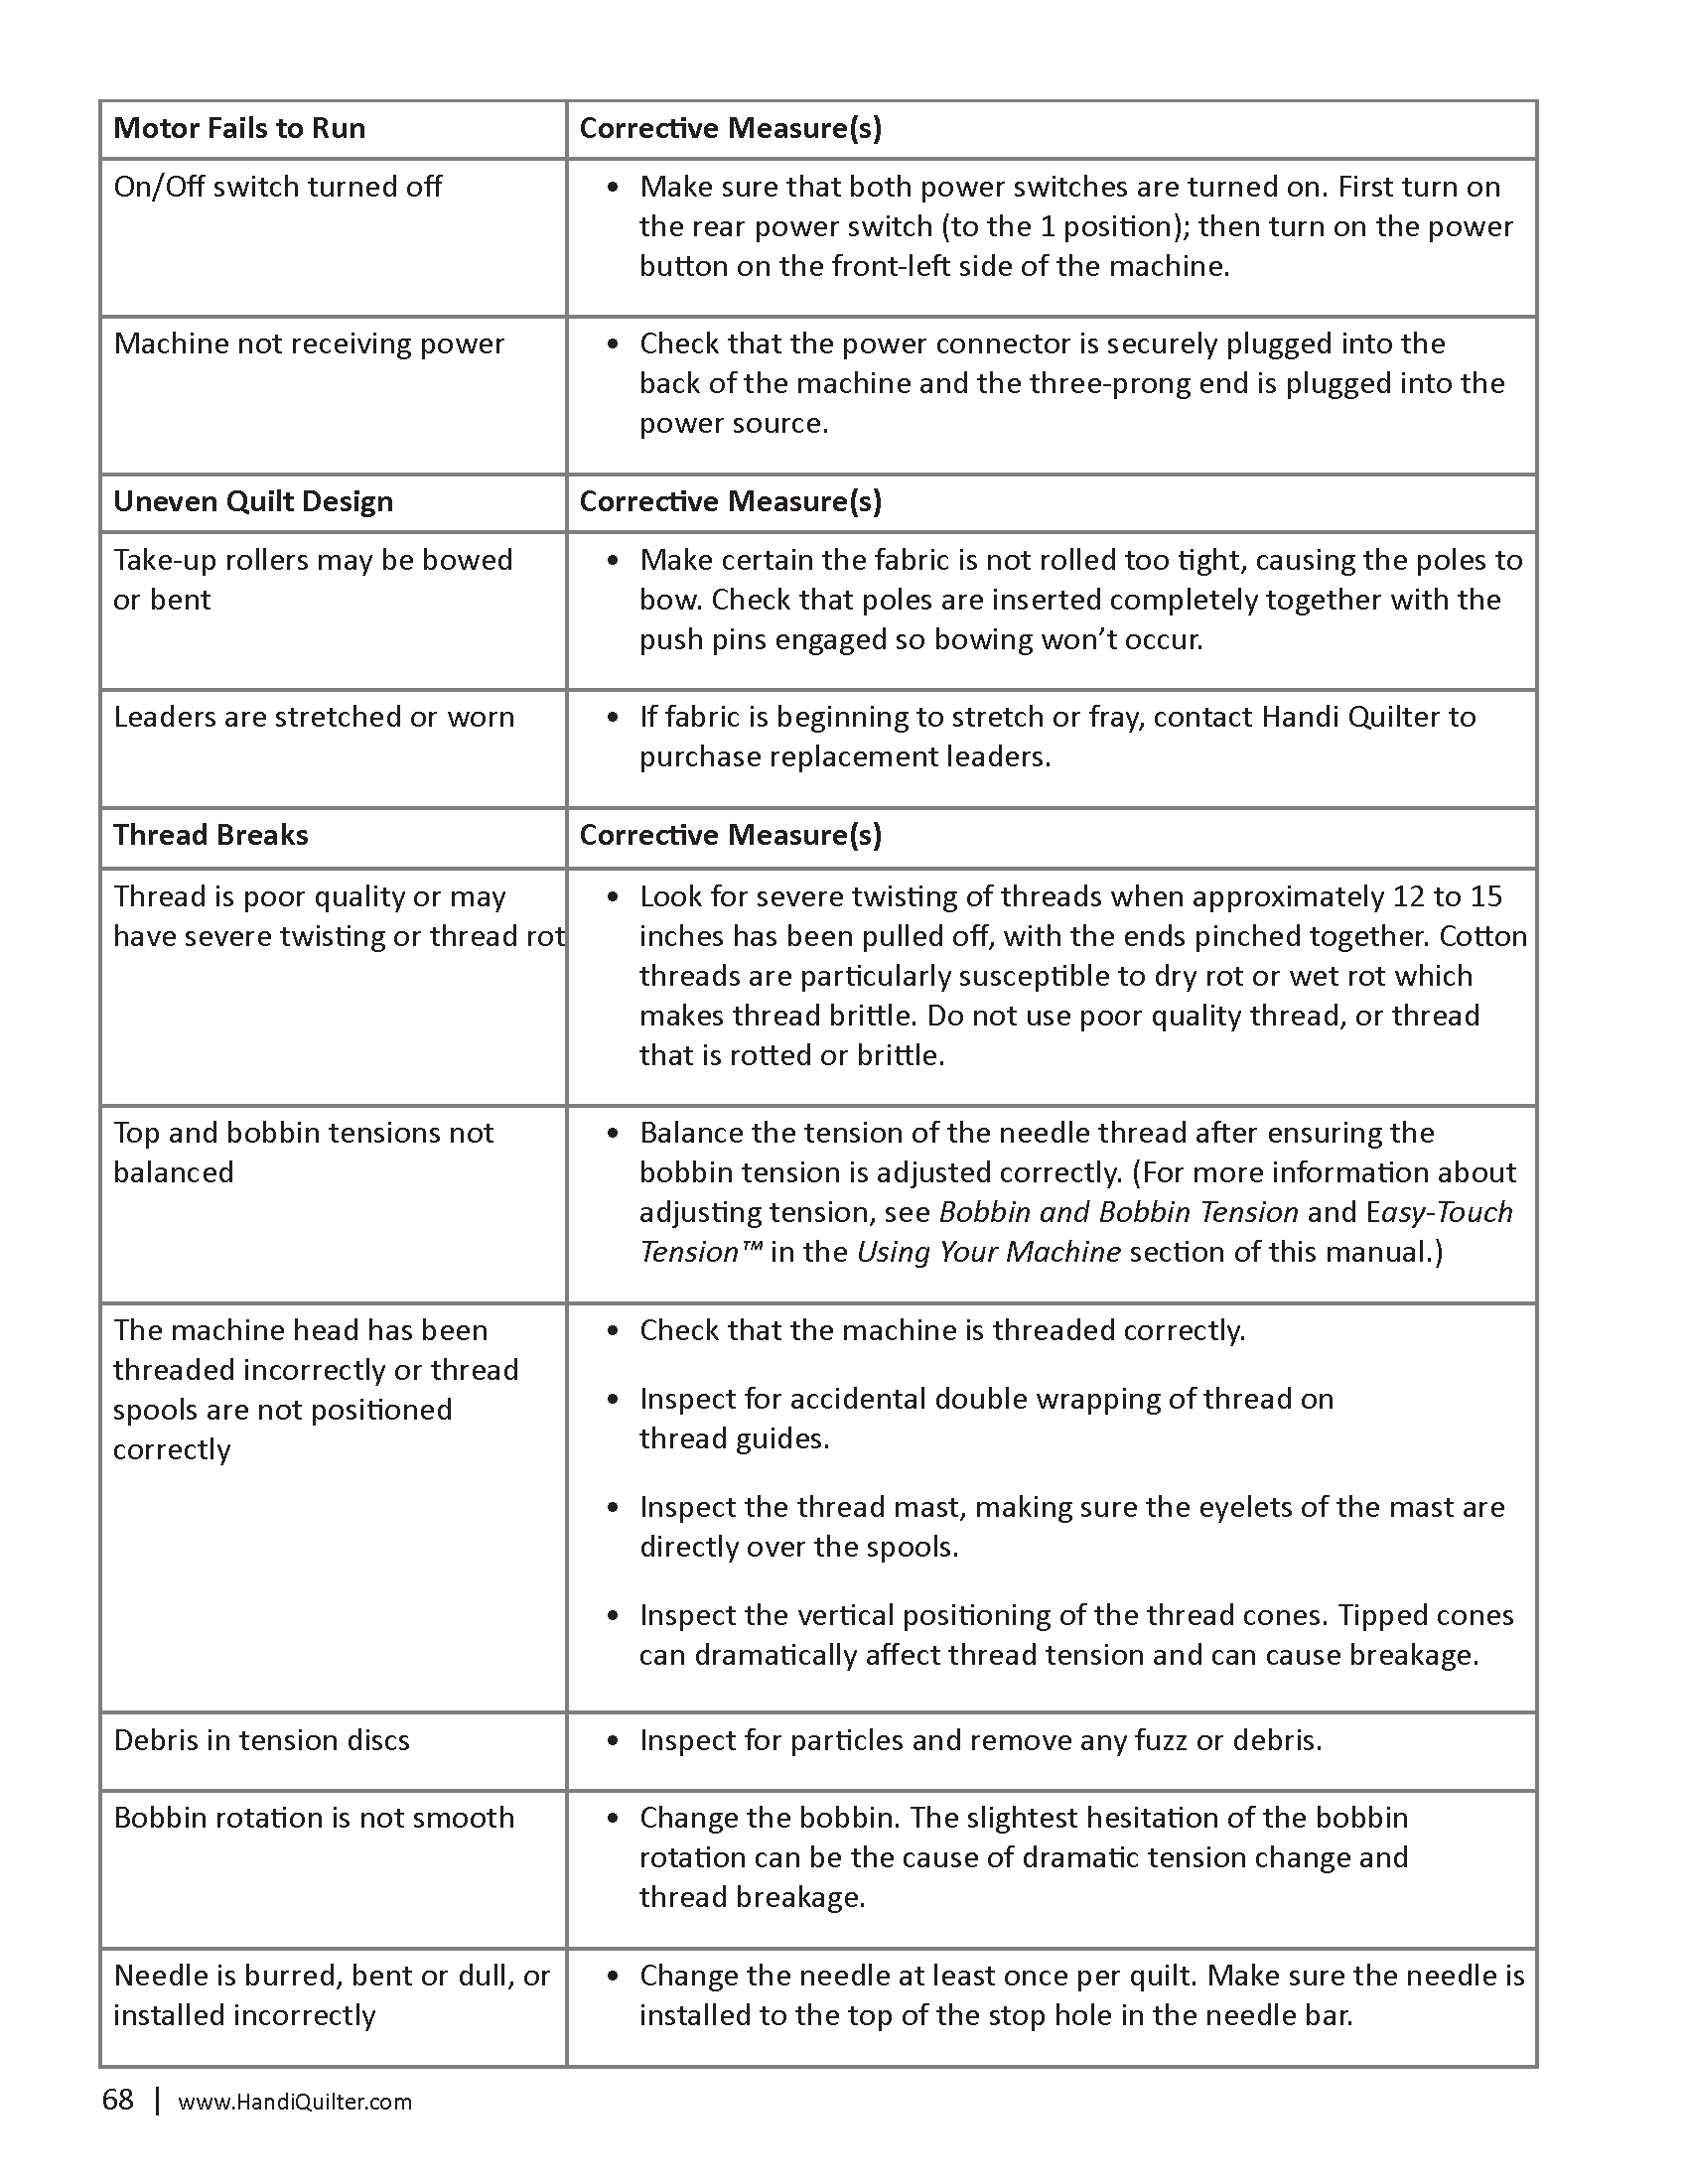 HQ-Forte-User-Manual-ALL-2_Page_69.png